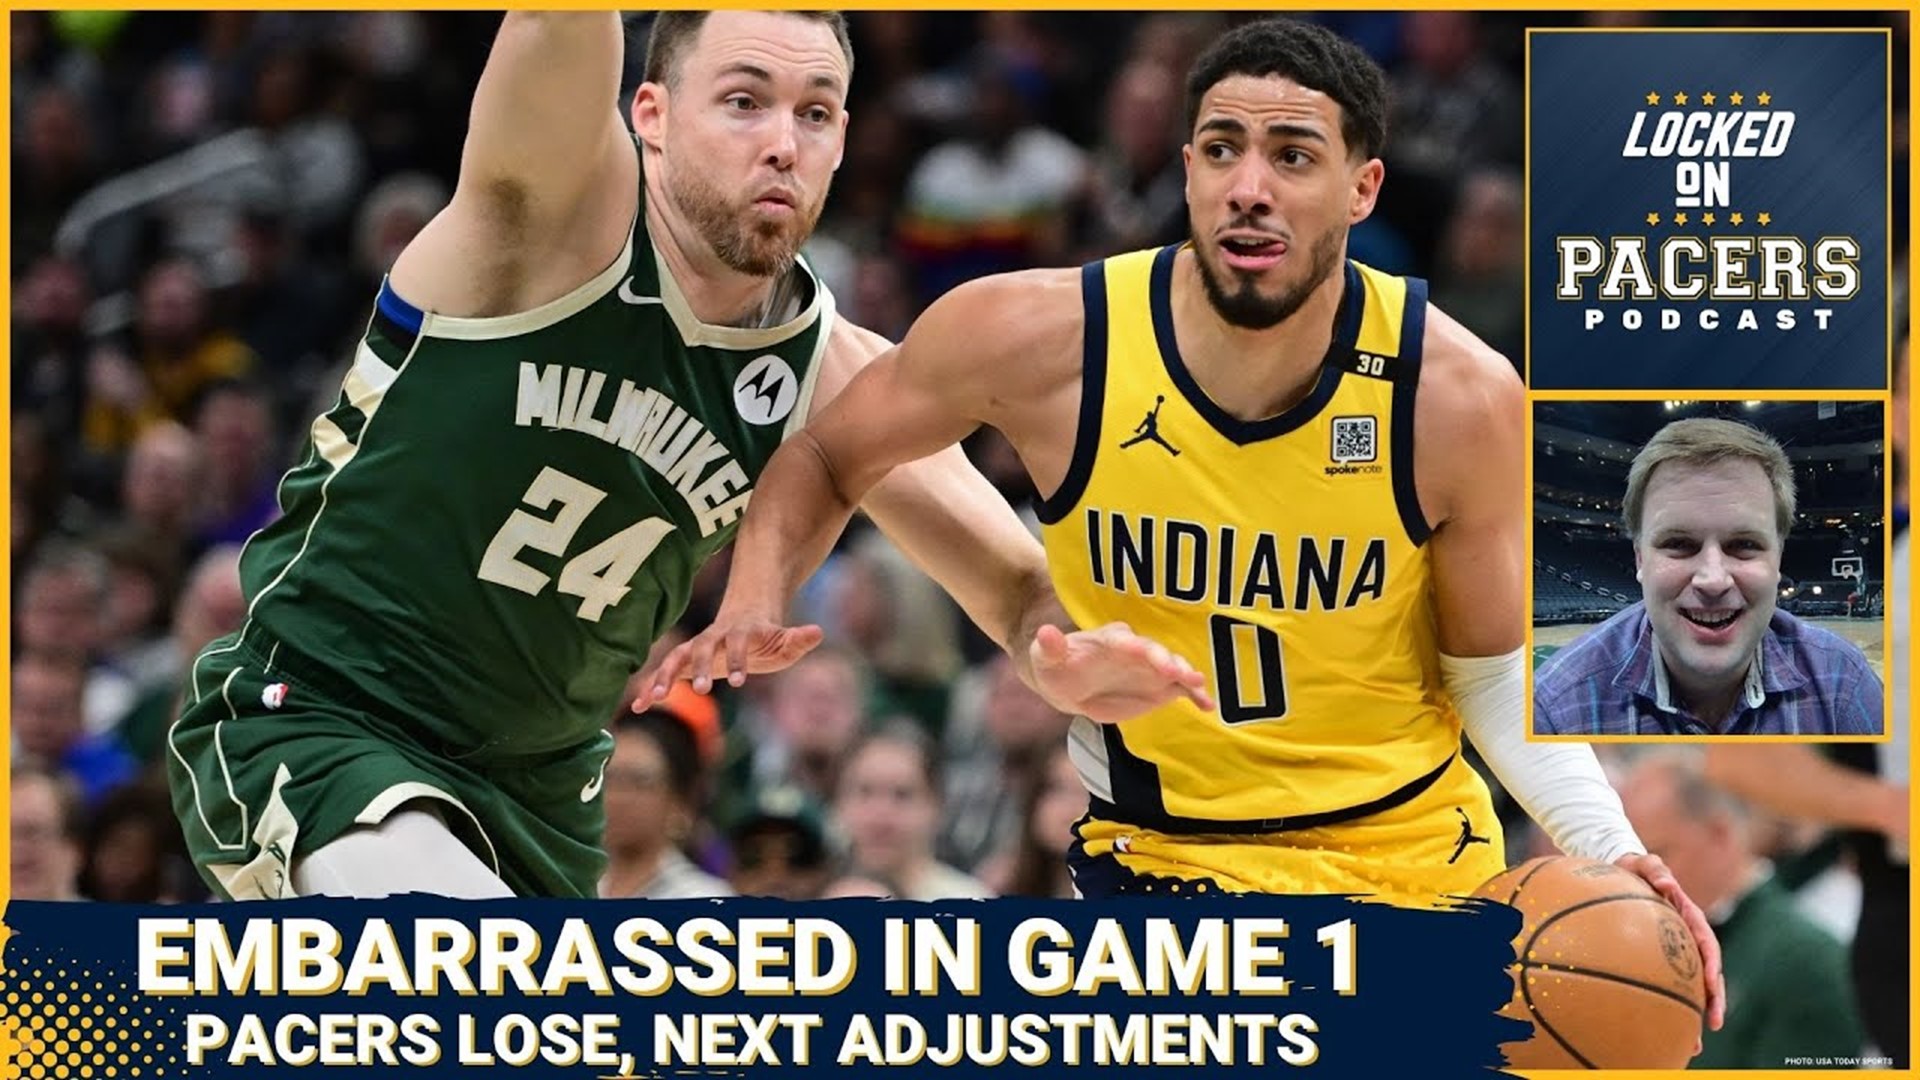 Indiana Pacers embarrassed by Milwaukee Bucks in Game 1. What went wrong for Pacers + how to adjust